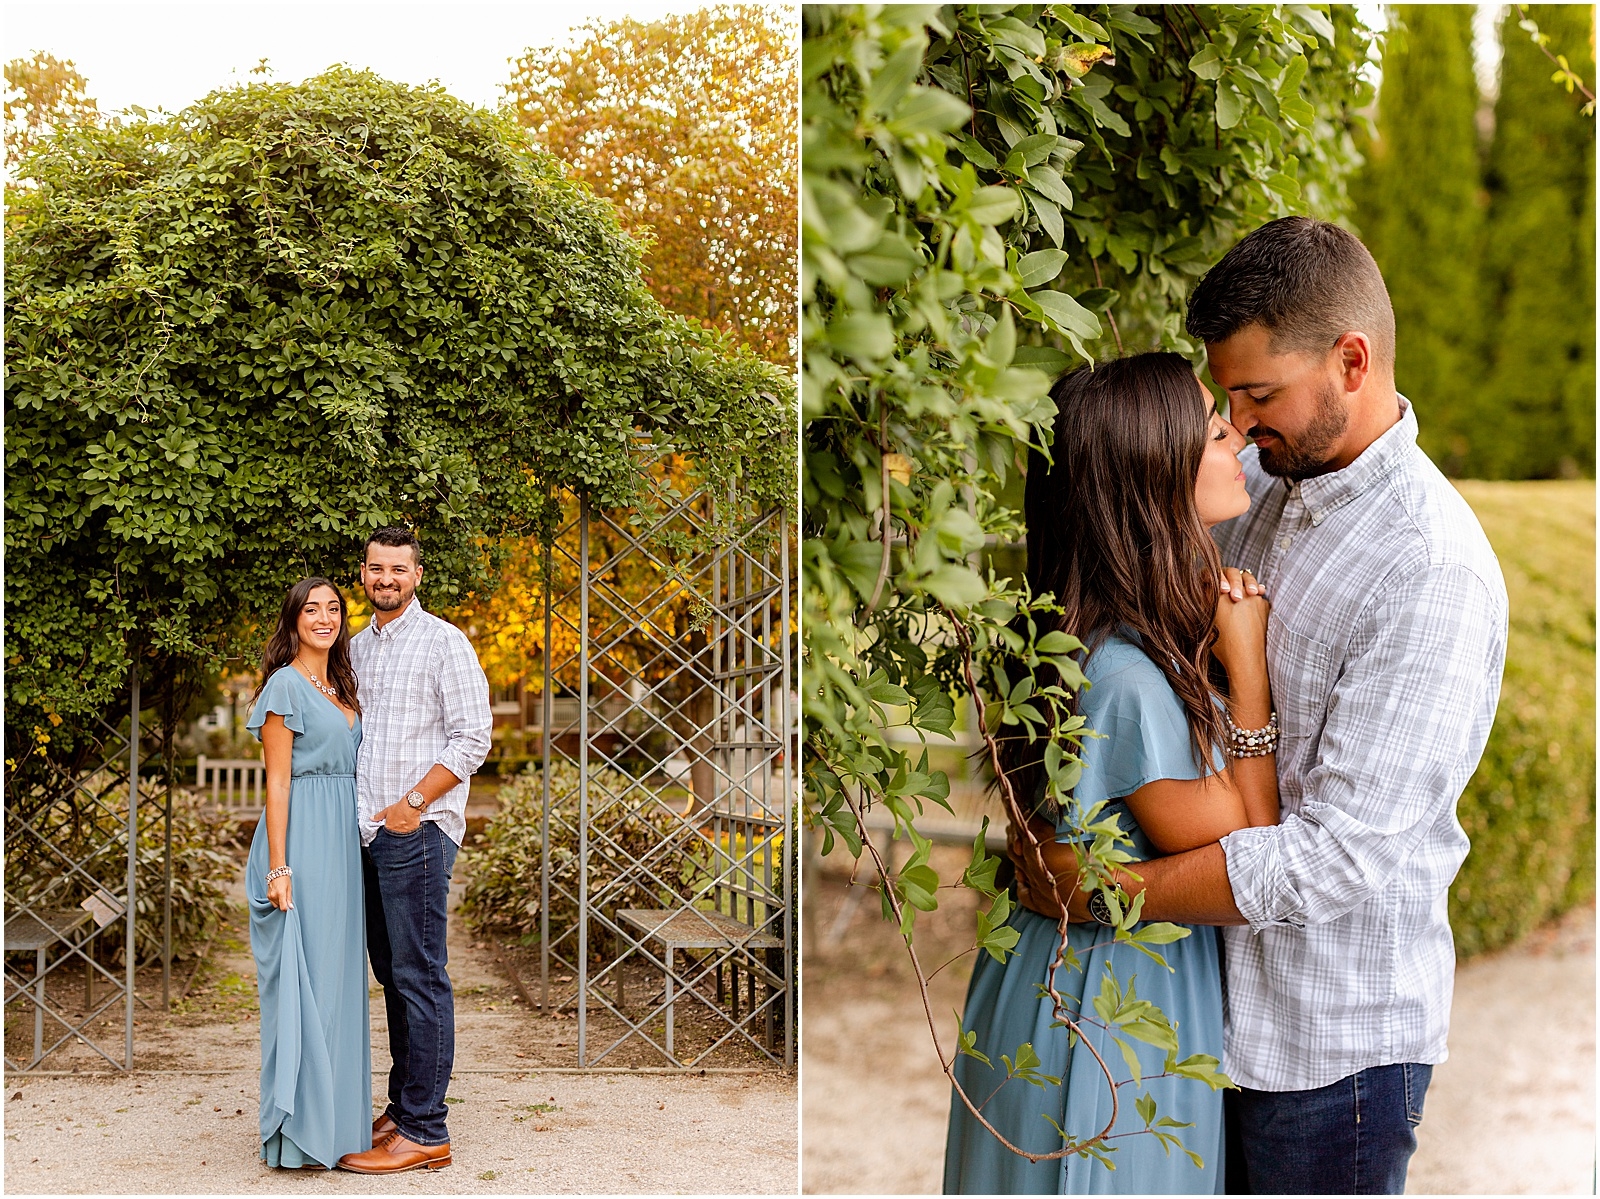 Sally and Andrew's Anniversary Session in New Harmony |Bret and Brandie Photography0008.jpg